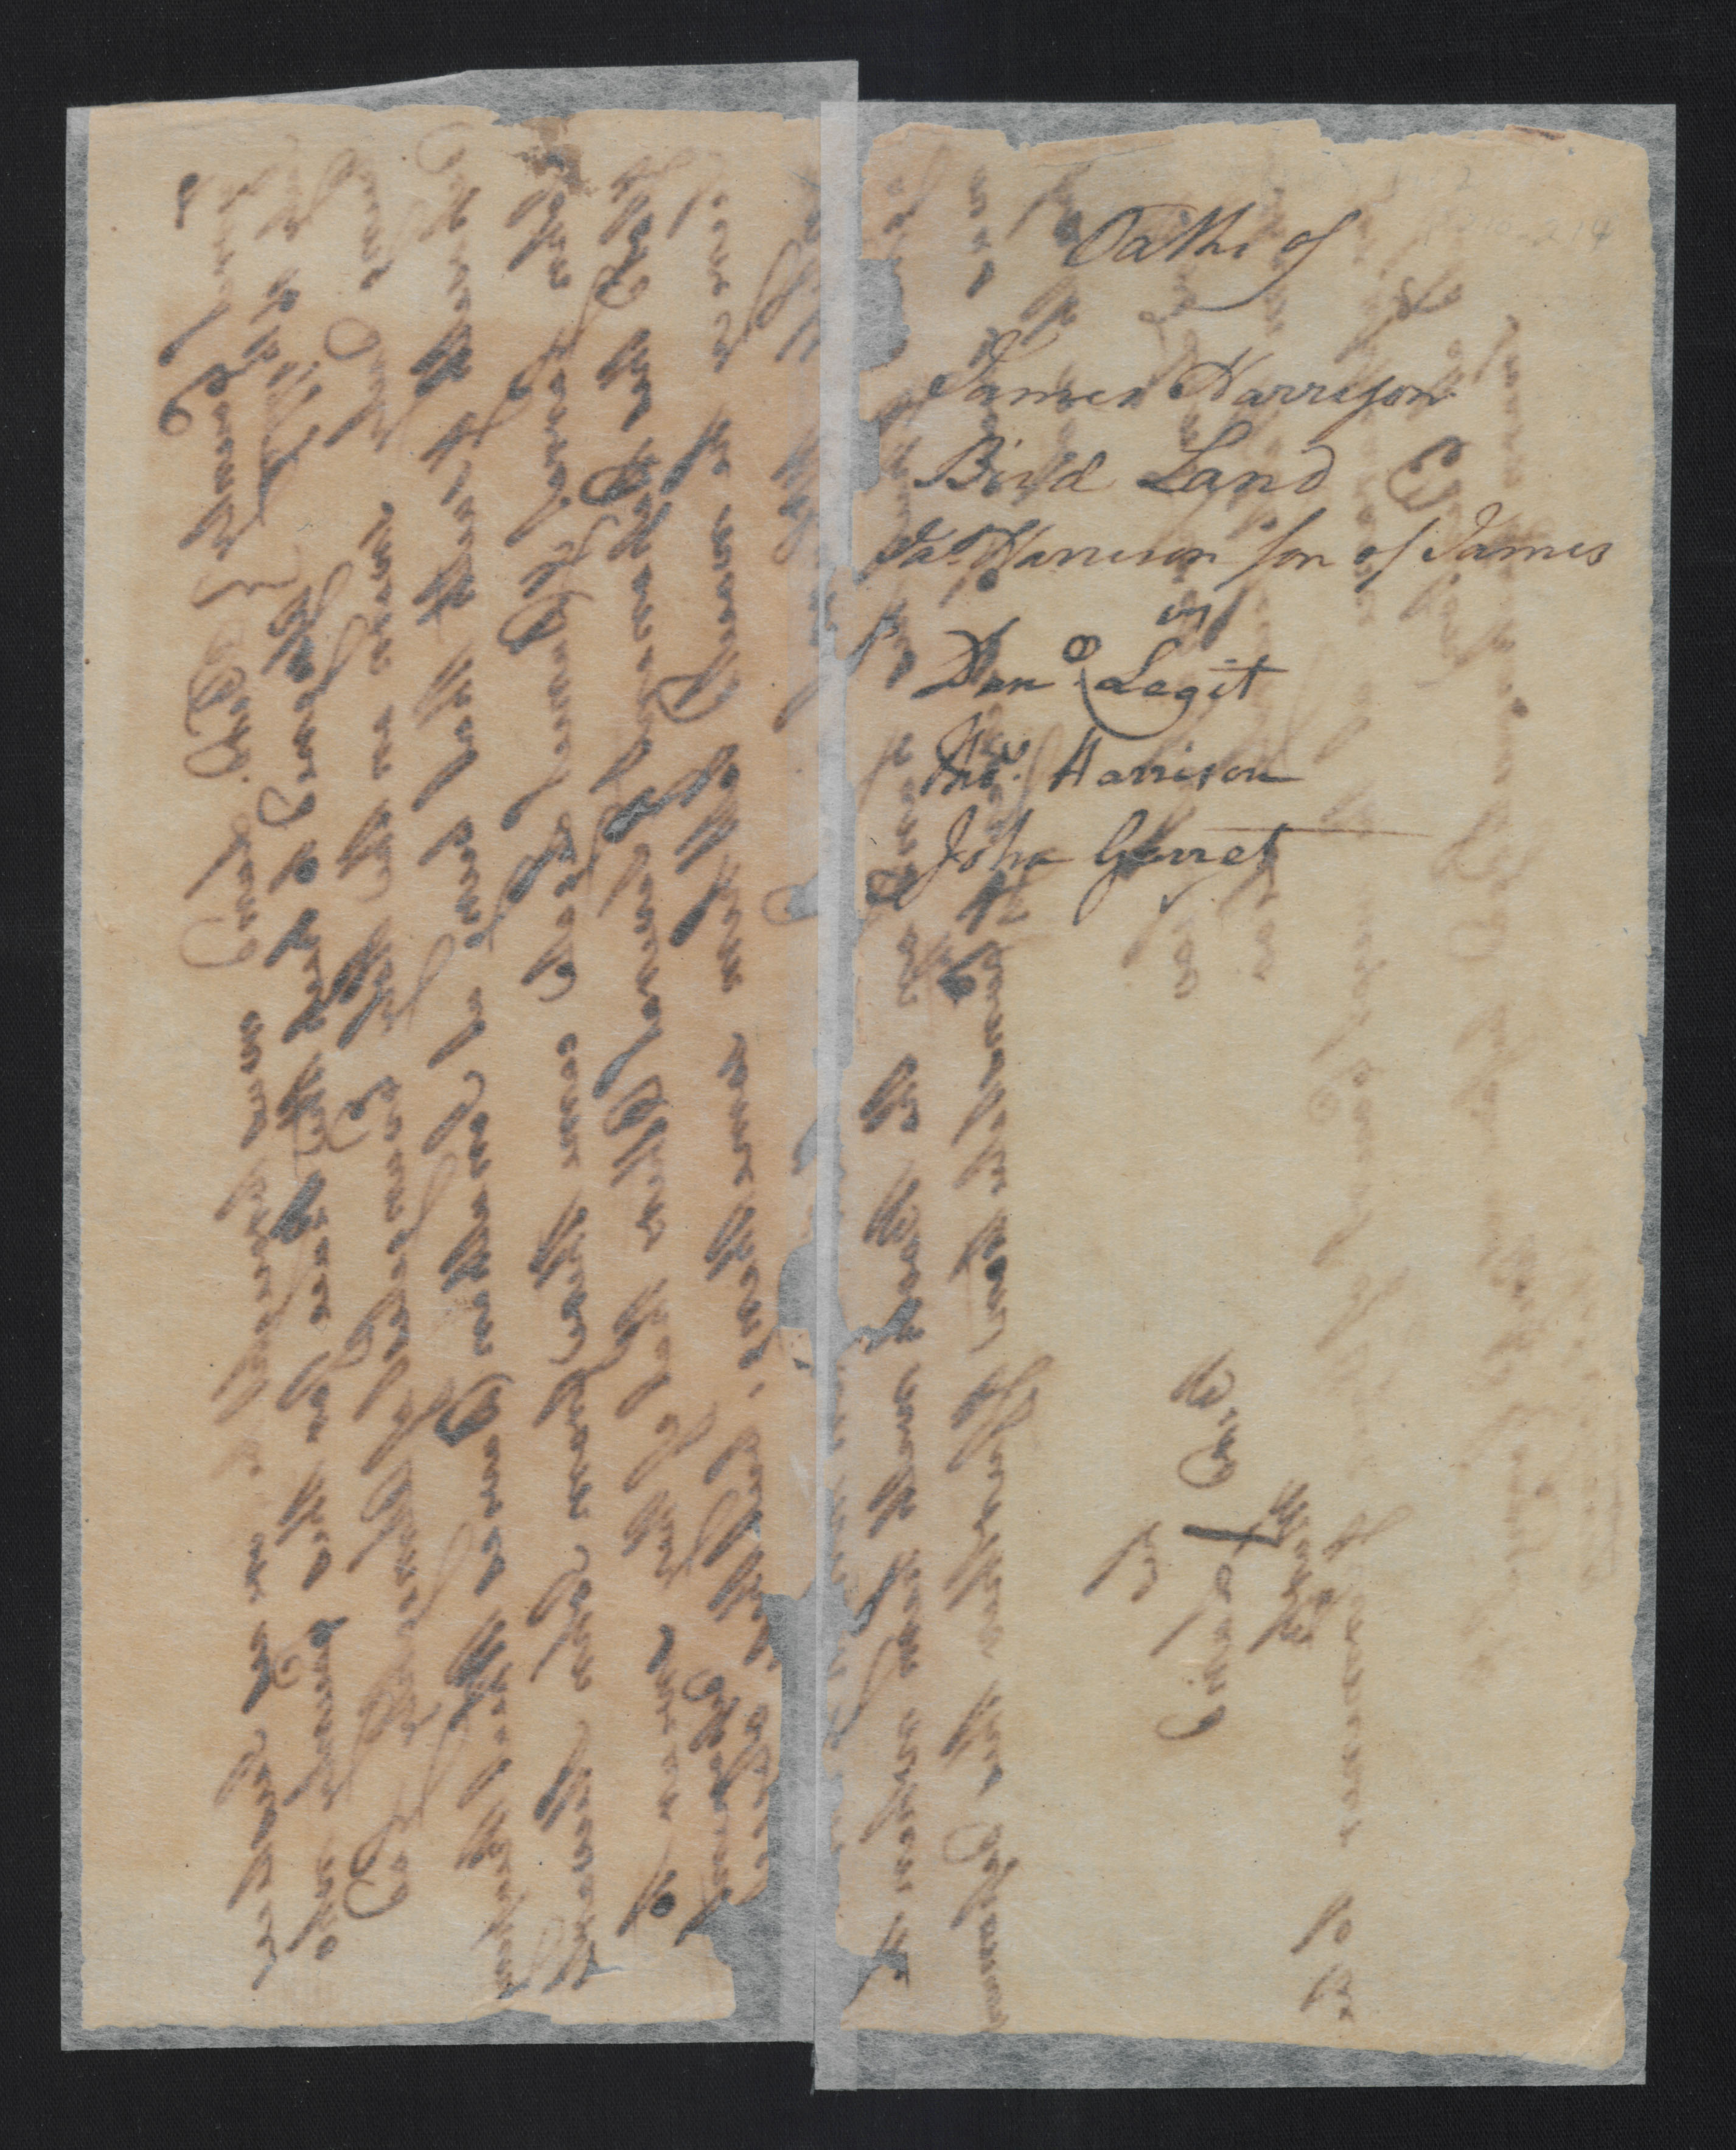 Reverse of Deposition of Bird Land, dated 16 July 1777